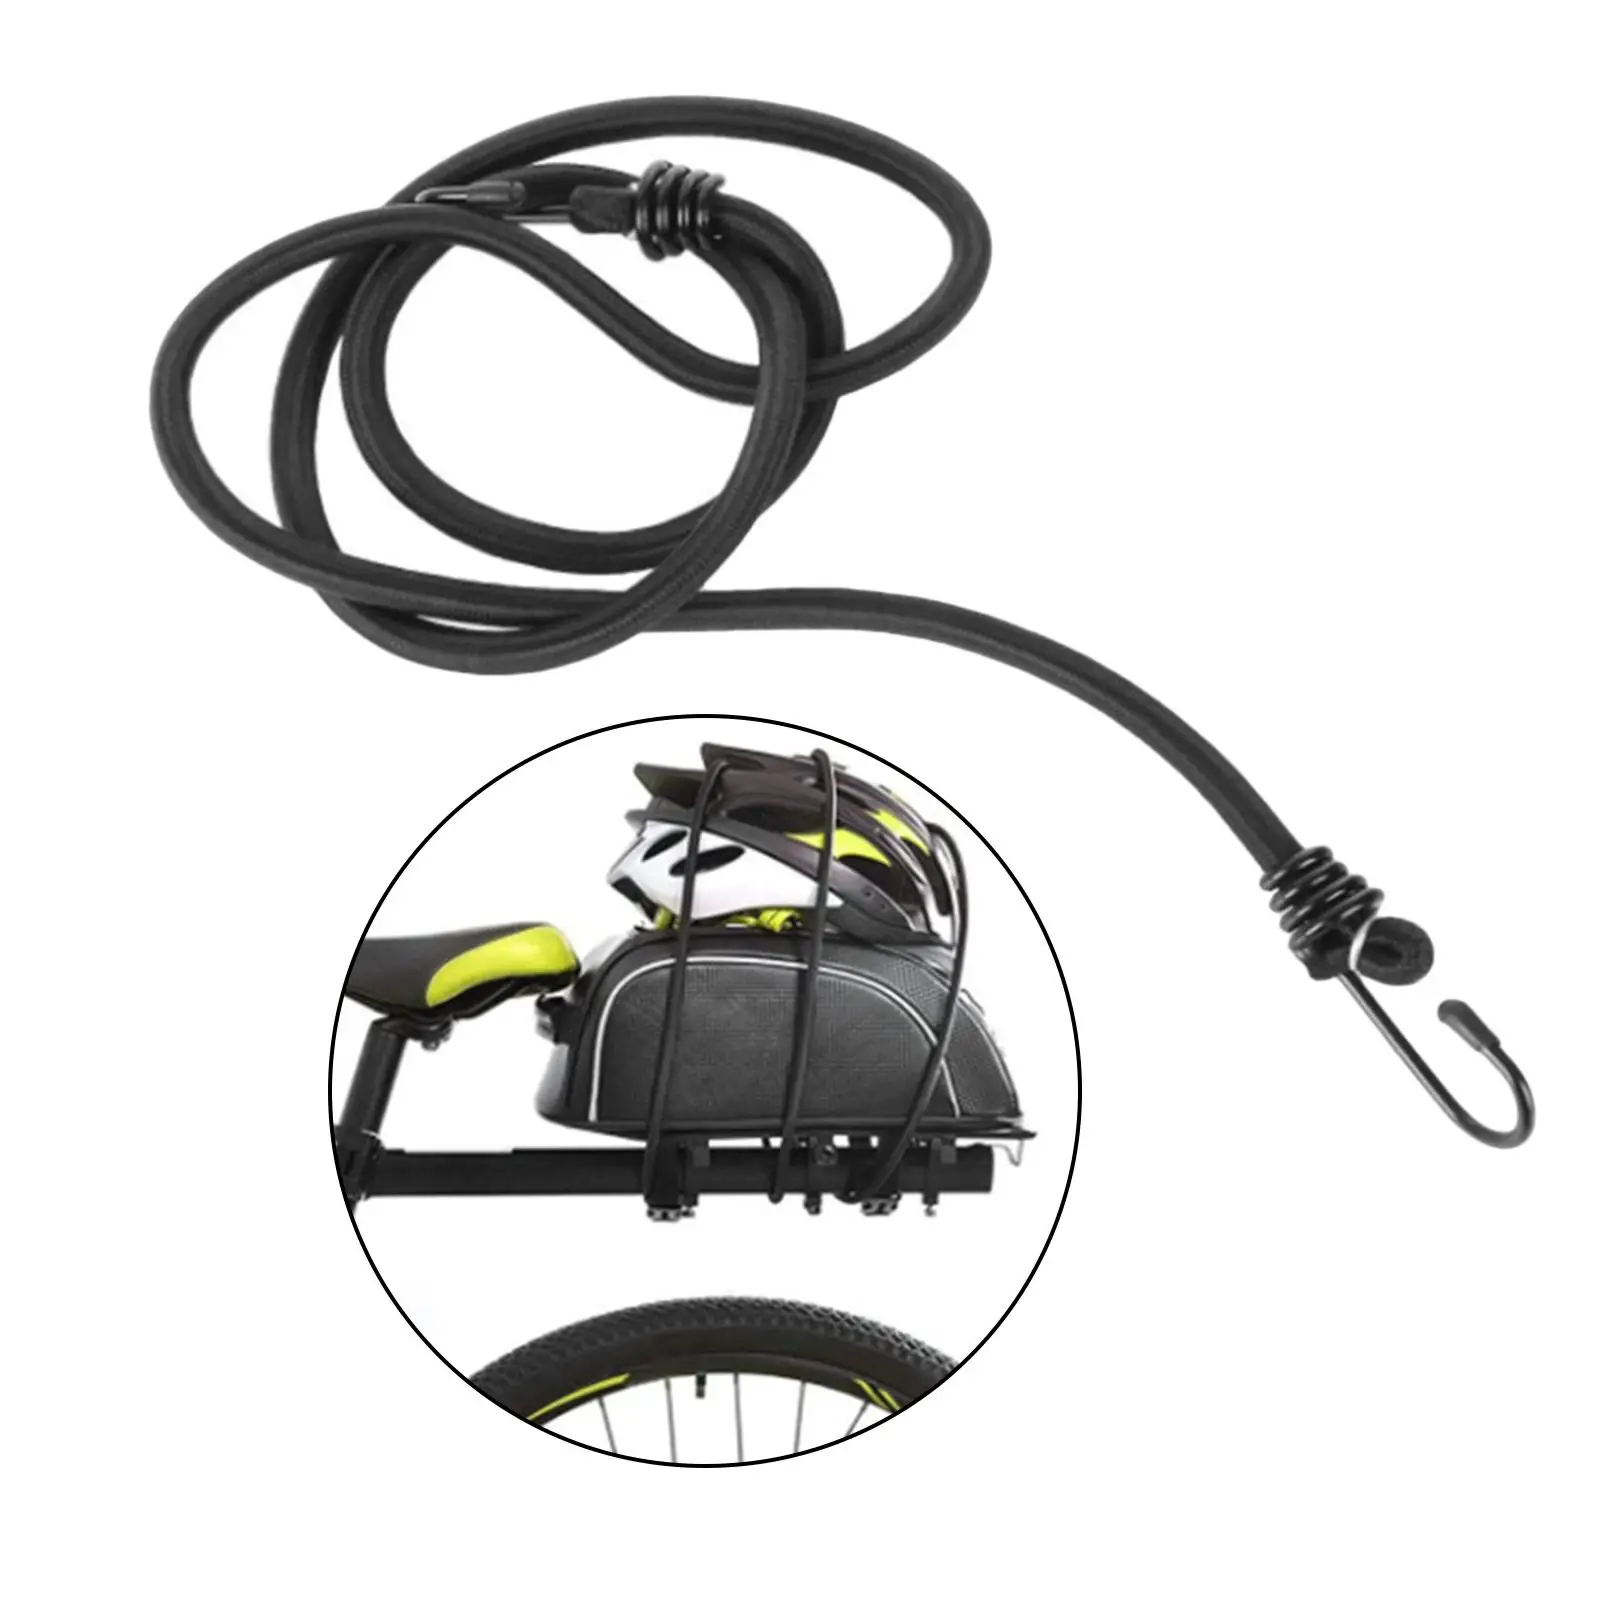 Car Bike Baggage Bungee Cords Motorcycle Bungie Straps Latex Tensioning Belts Strong Elastic Tie Down with Metal Two Hooks